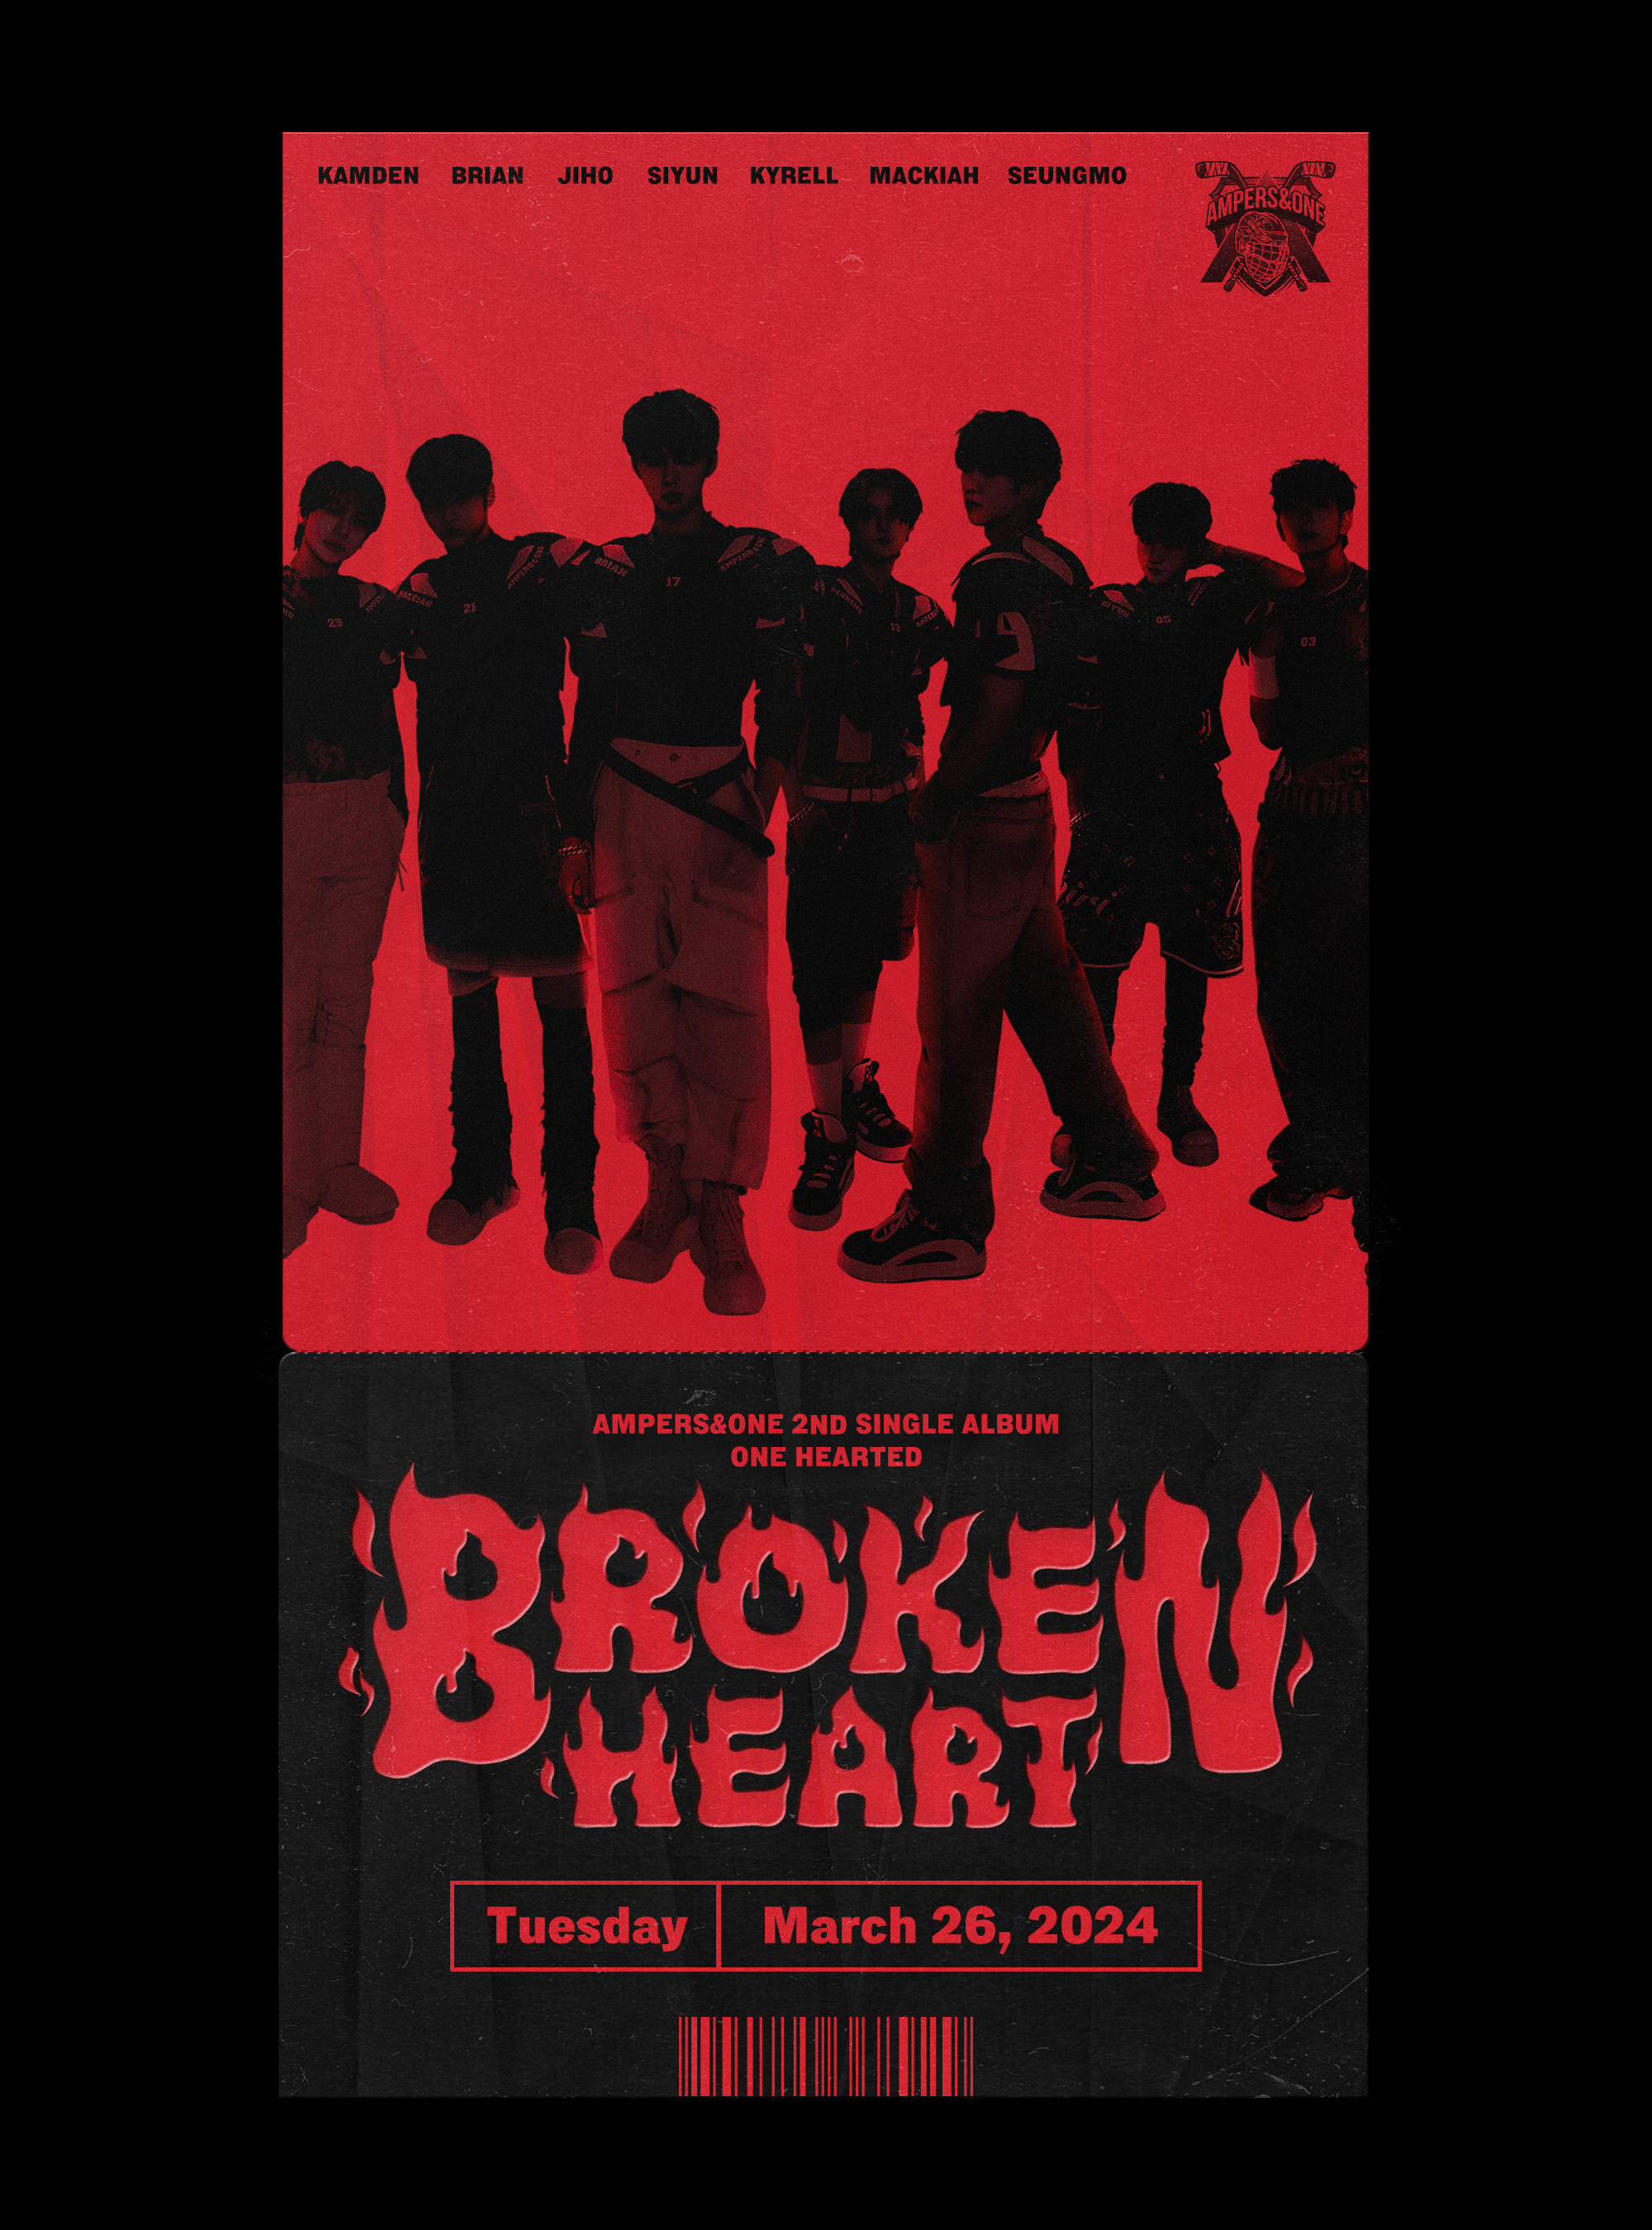 AMPERS&ONE Announces 1st-Ever Comeback Date With Teaser For “Broken Heart”